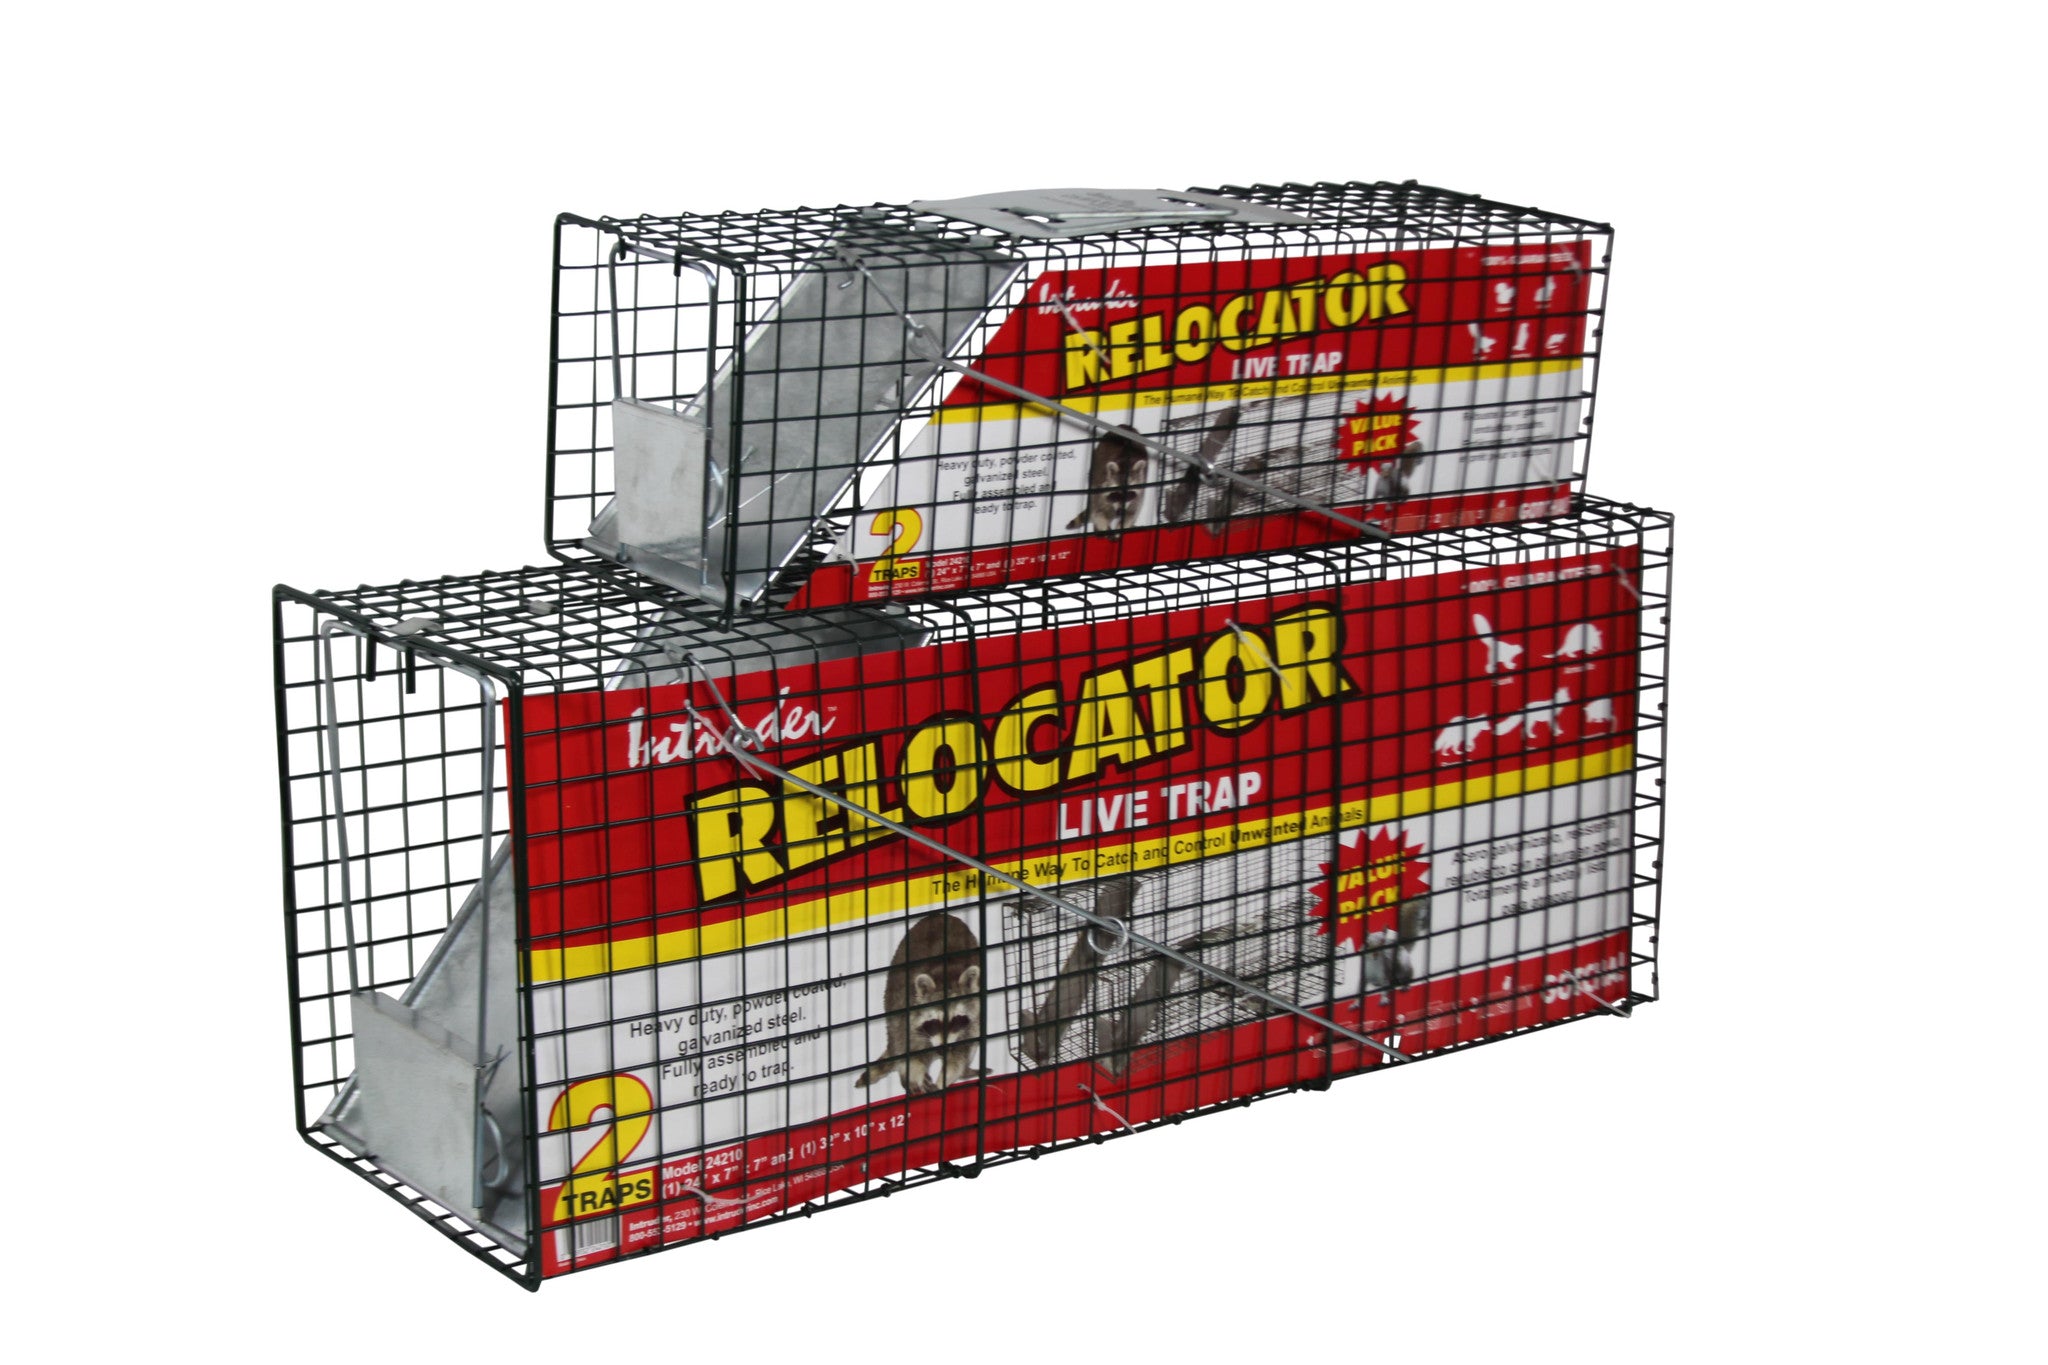 Intruder The Better Mousetrap™, Pack of 6 Traps – Prime Retreat Products